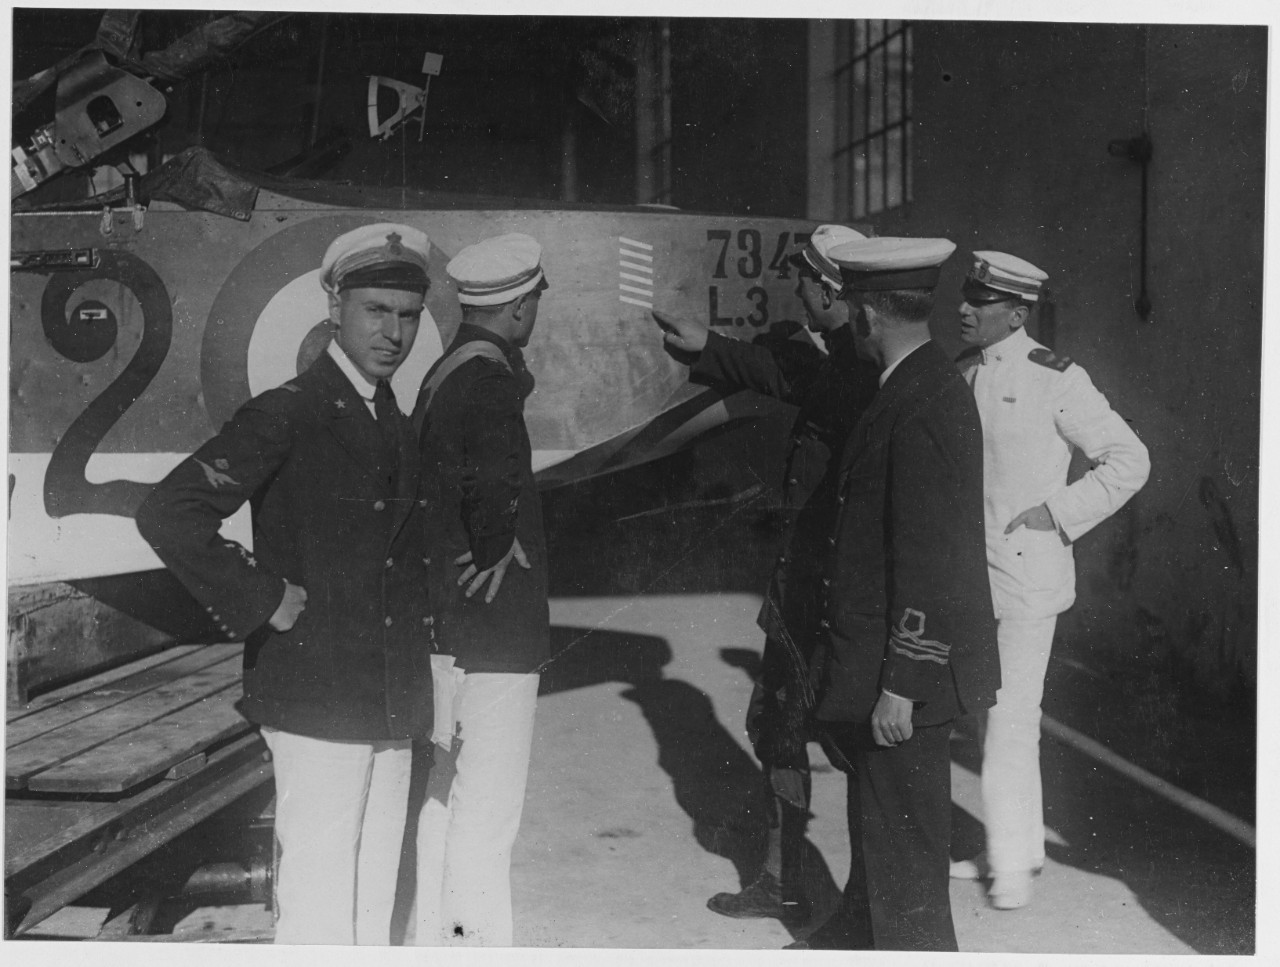 A seaplane with wound stripes. One stripe for each hit in action